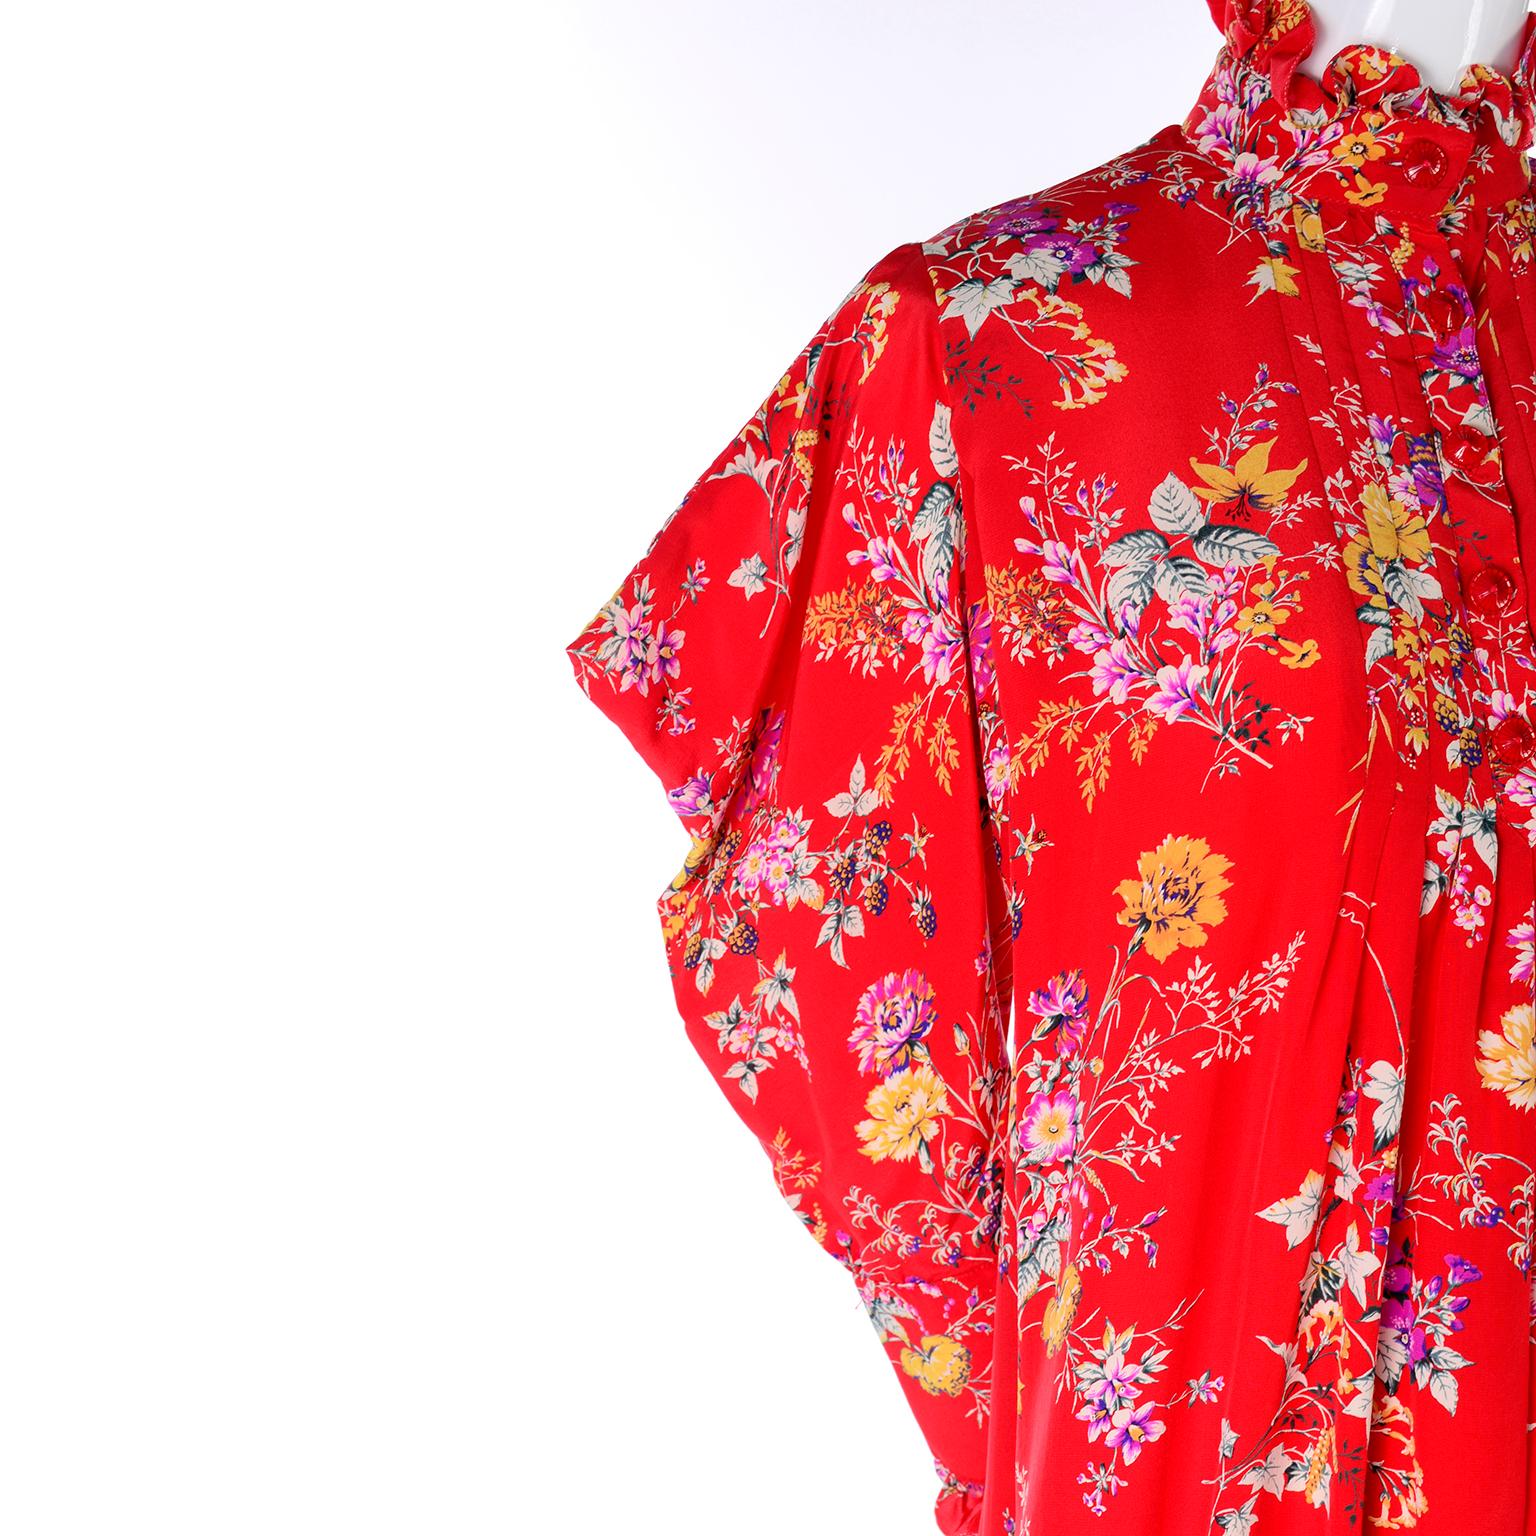 This is a beautiful and bright silk vintage dress with a high neck n a yellow, purple and green floral silk print designed by Emanuel Ungaro. It is a beautiful, flowing tent dress that has unique peaked avant garde sleeves! The long sleeves drape